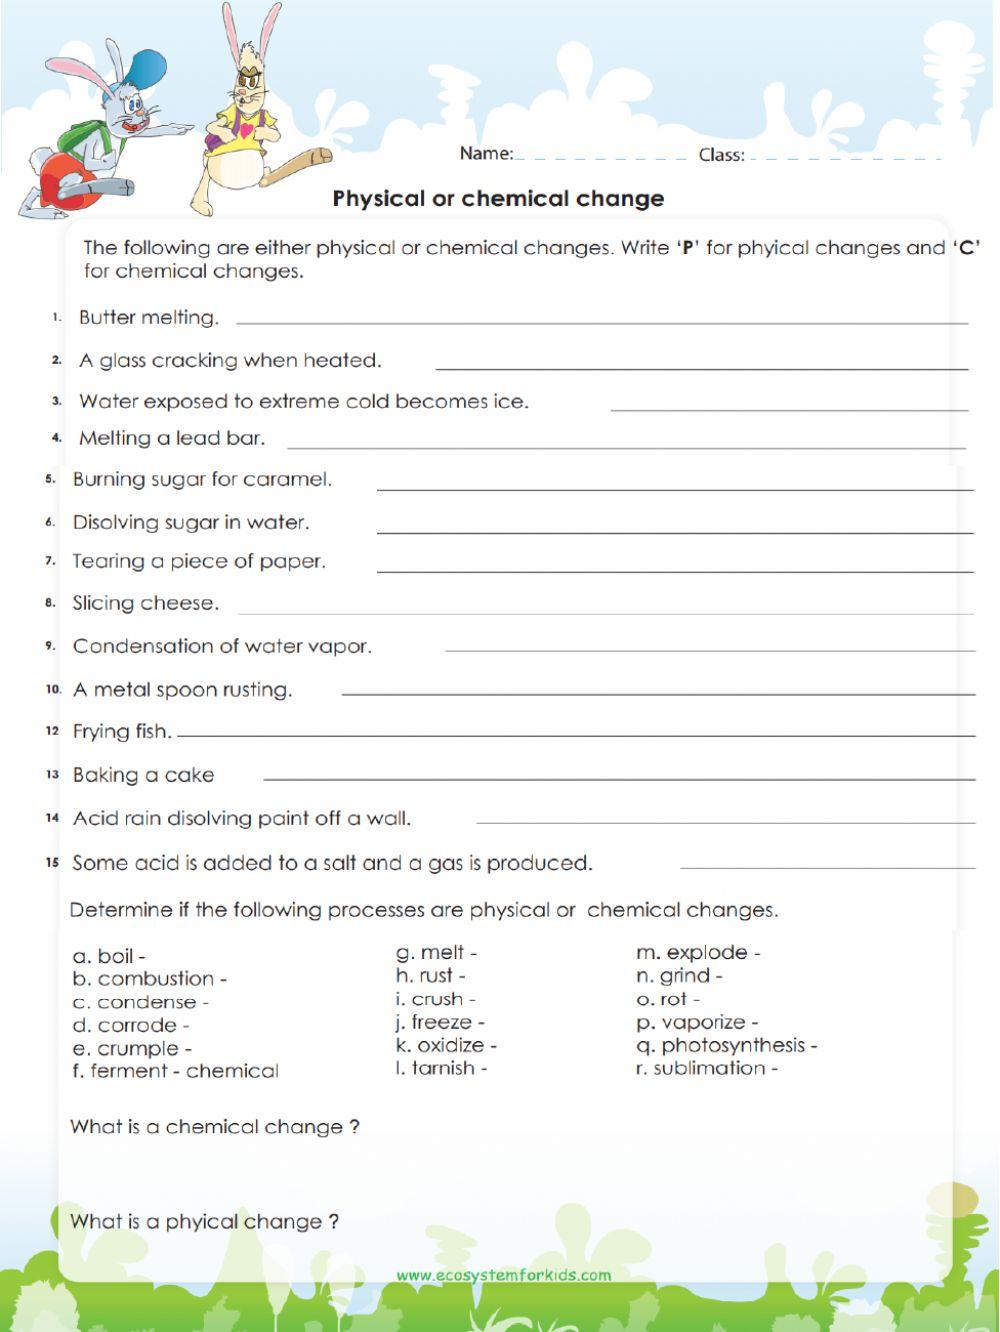 Physical and chemical changes